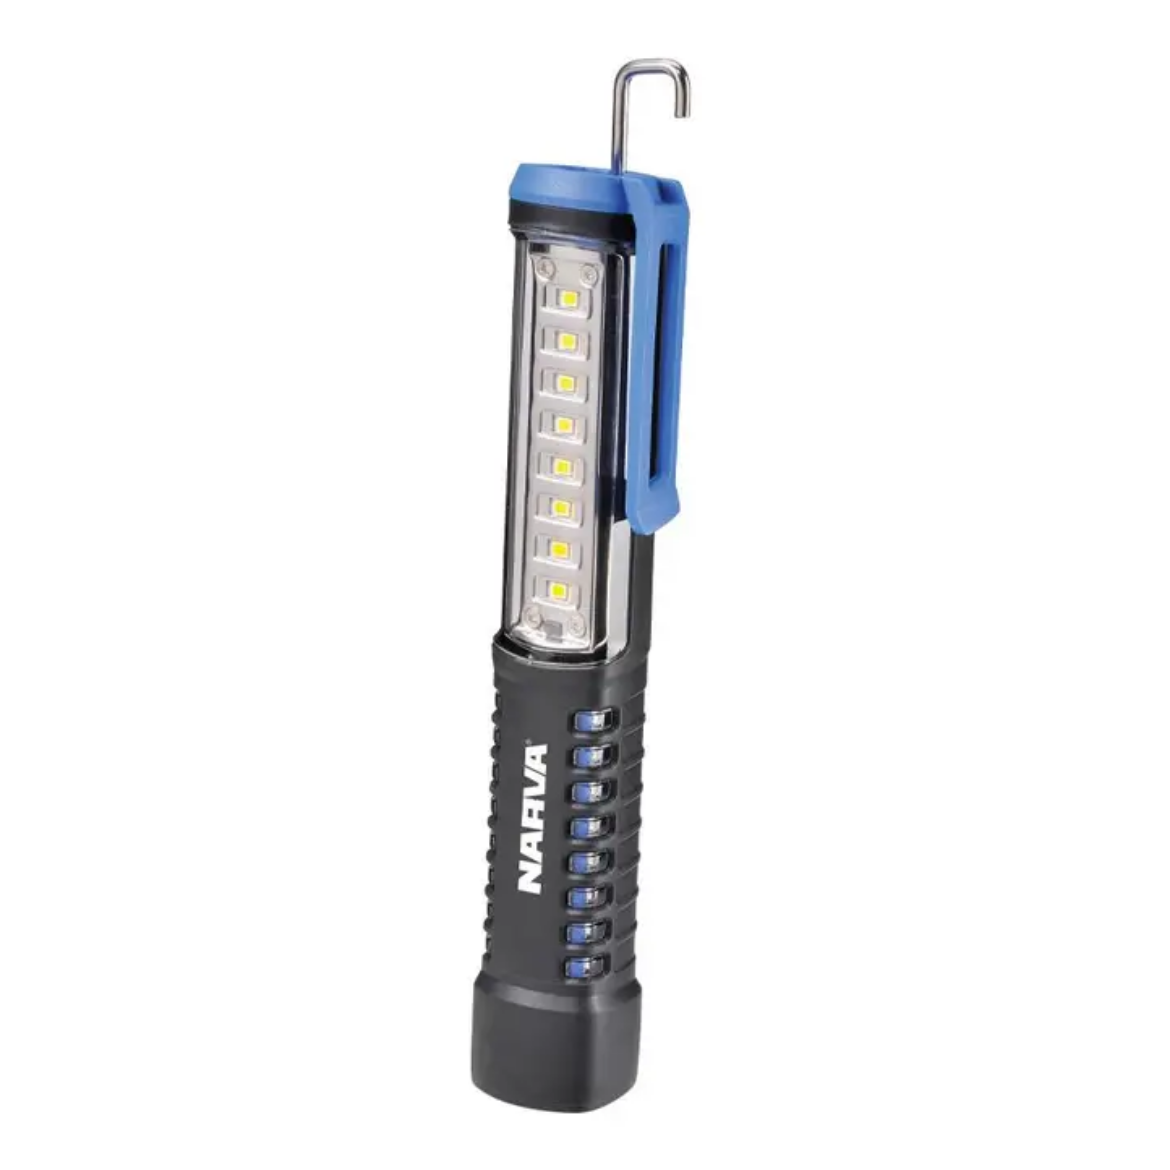 Picture of NARVA HIGH POWERED POCKET RECHARGEABLE LED INSPECTION LAMP - 8 POWERFUL 0.5W LEDS